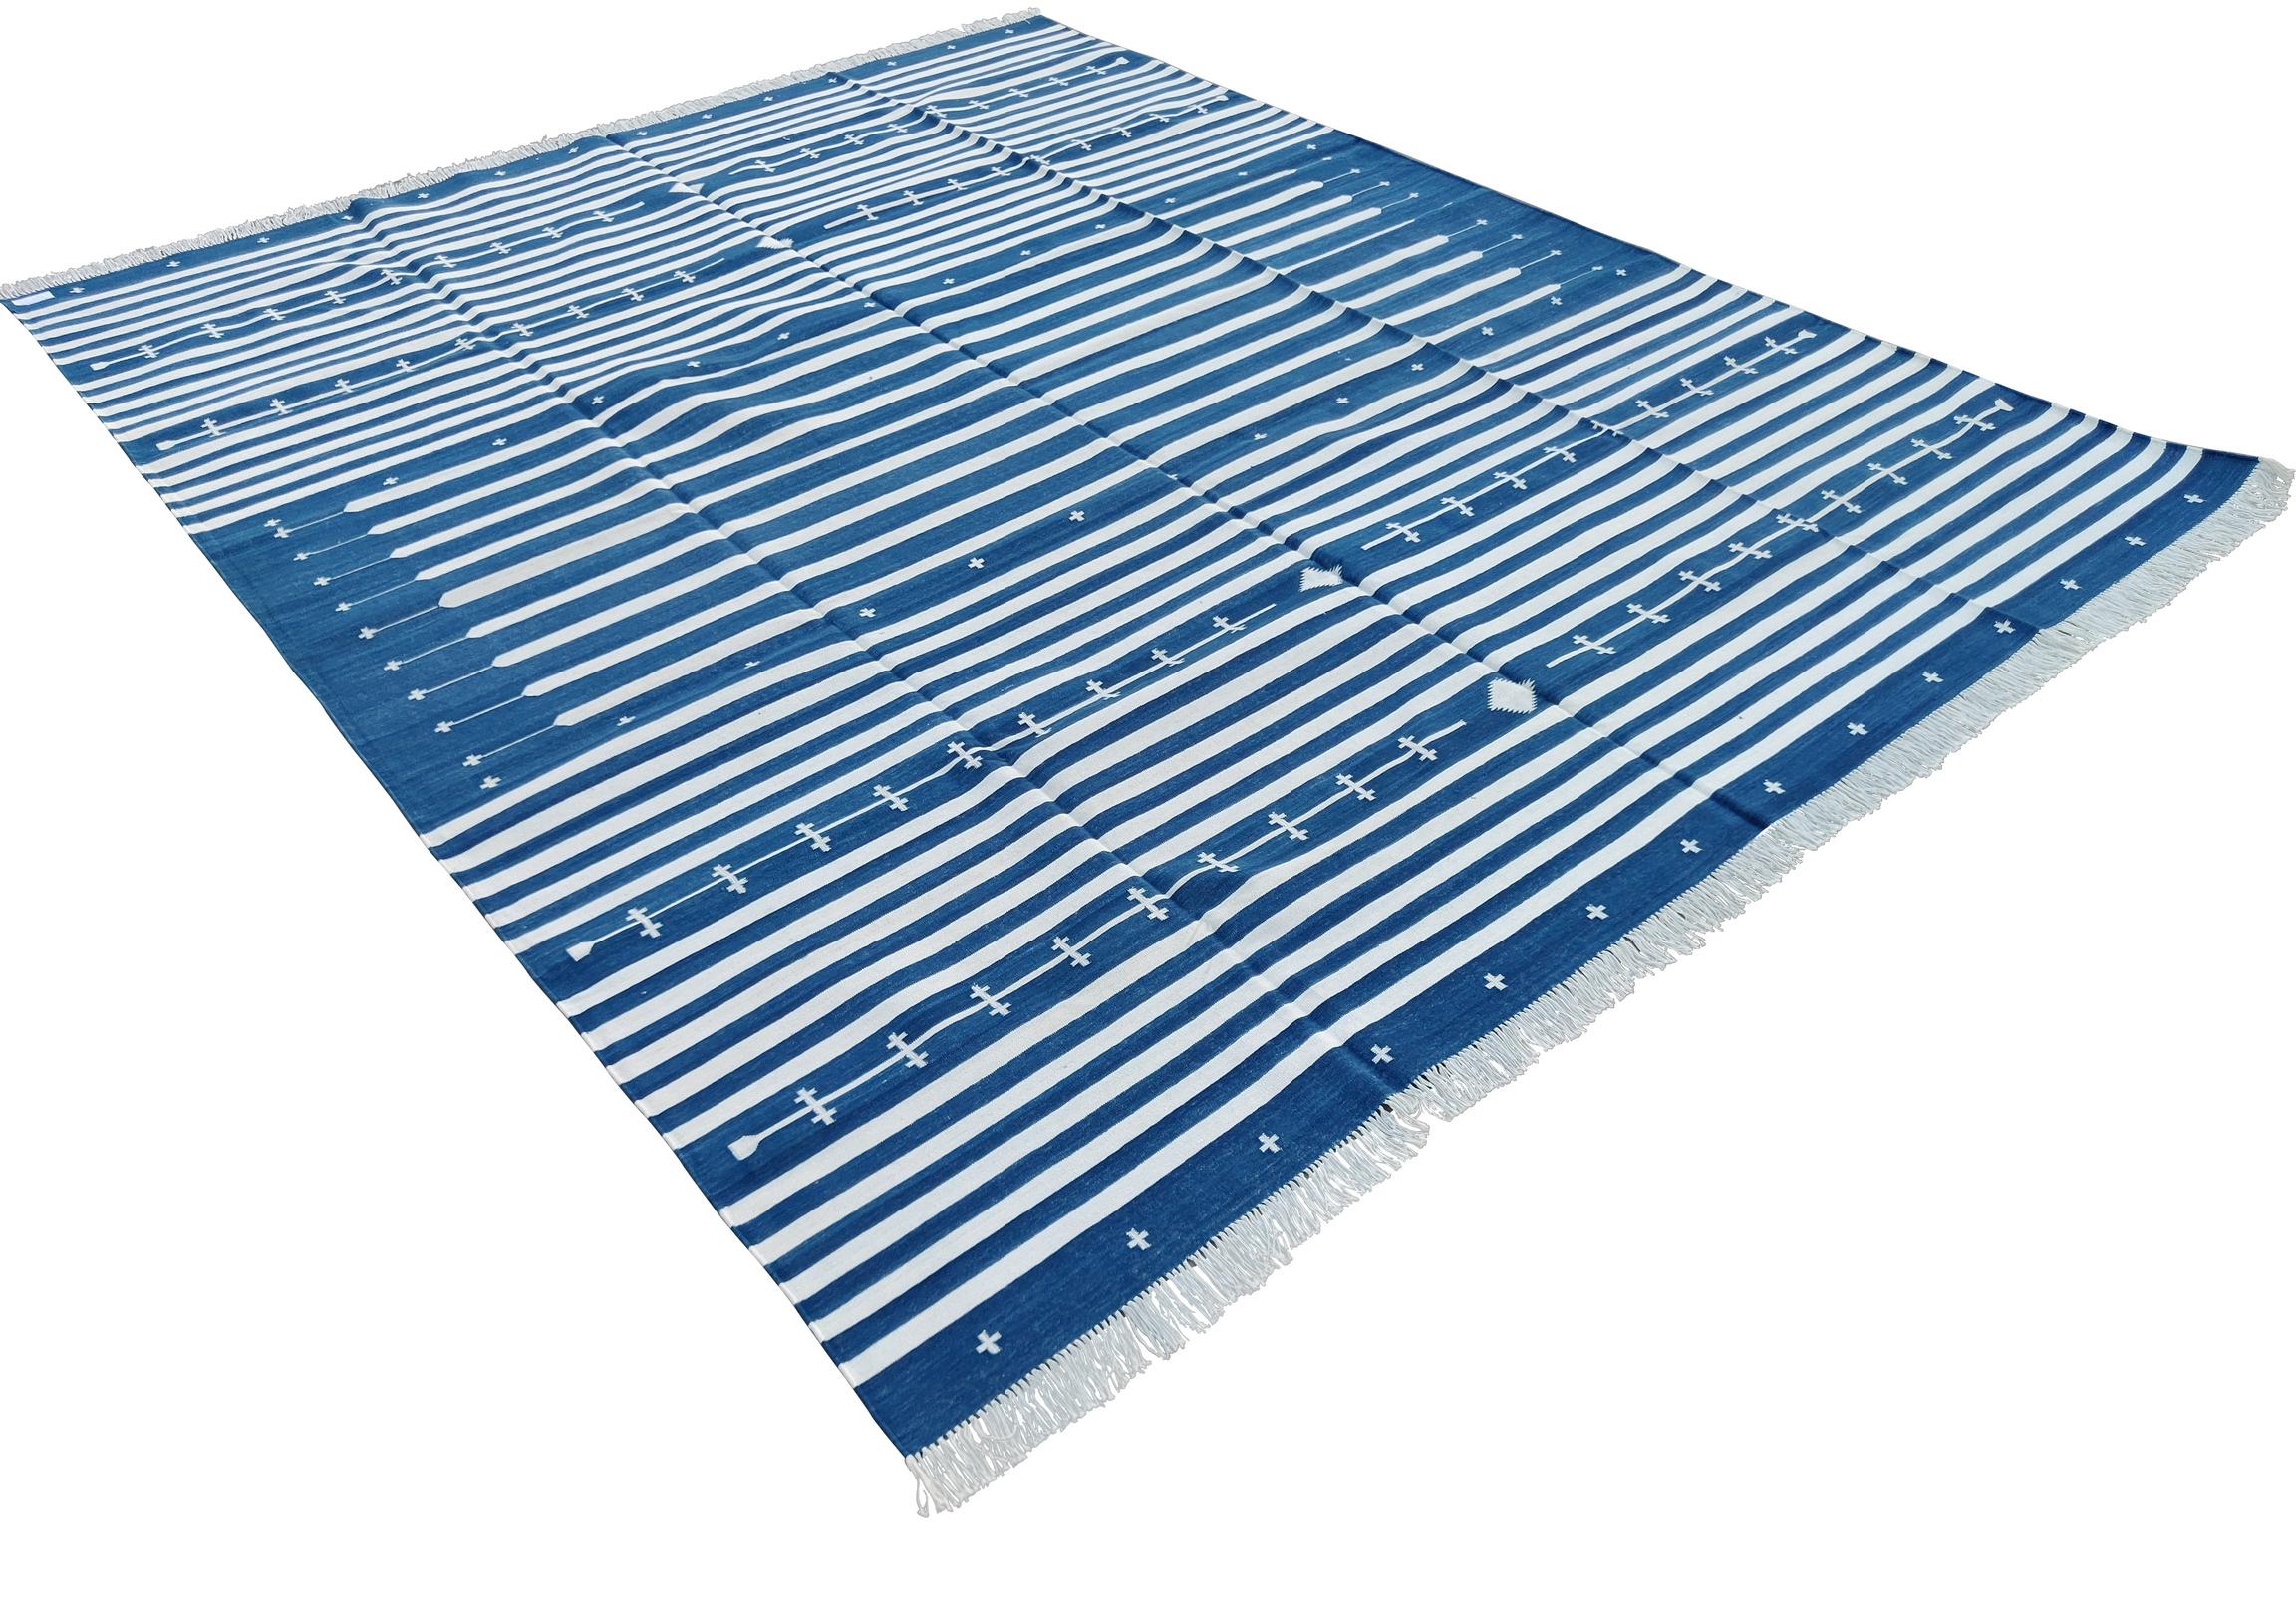 Cotton Vegetable Dyed Indigo Blue And White Striped Indian Dhurrie Rug-8'x10' 
These special flat-weave dhurries are hand-woven with 15 ply 100% cotton yarn. Due to the special manufacturing techniques used to create our rugs, the size and color of